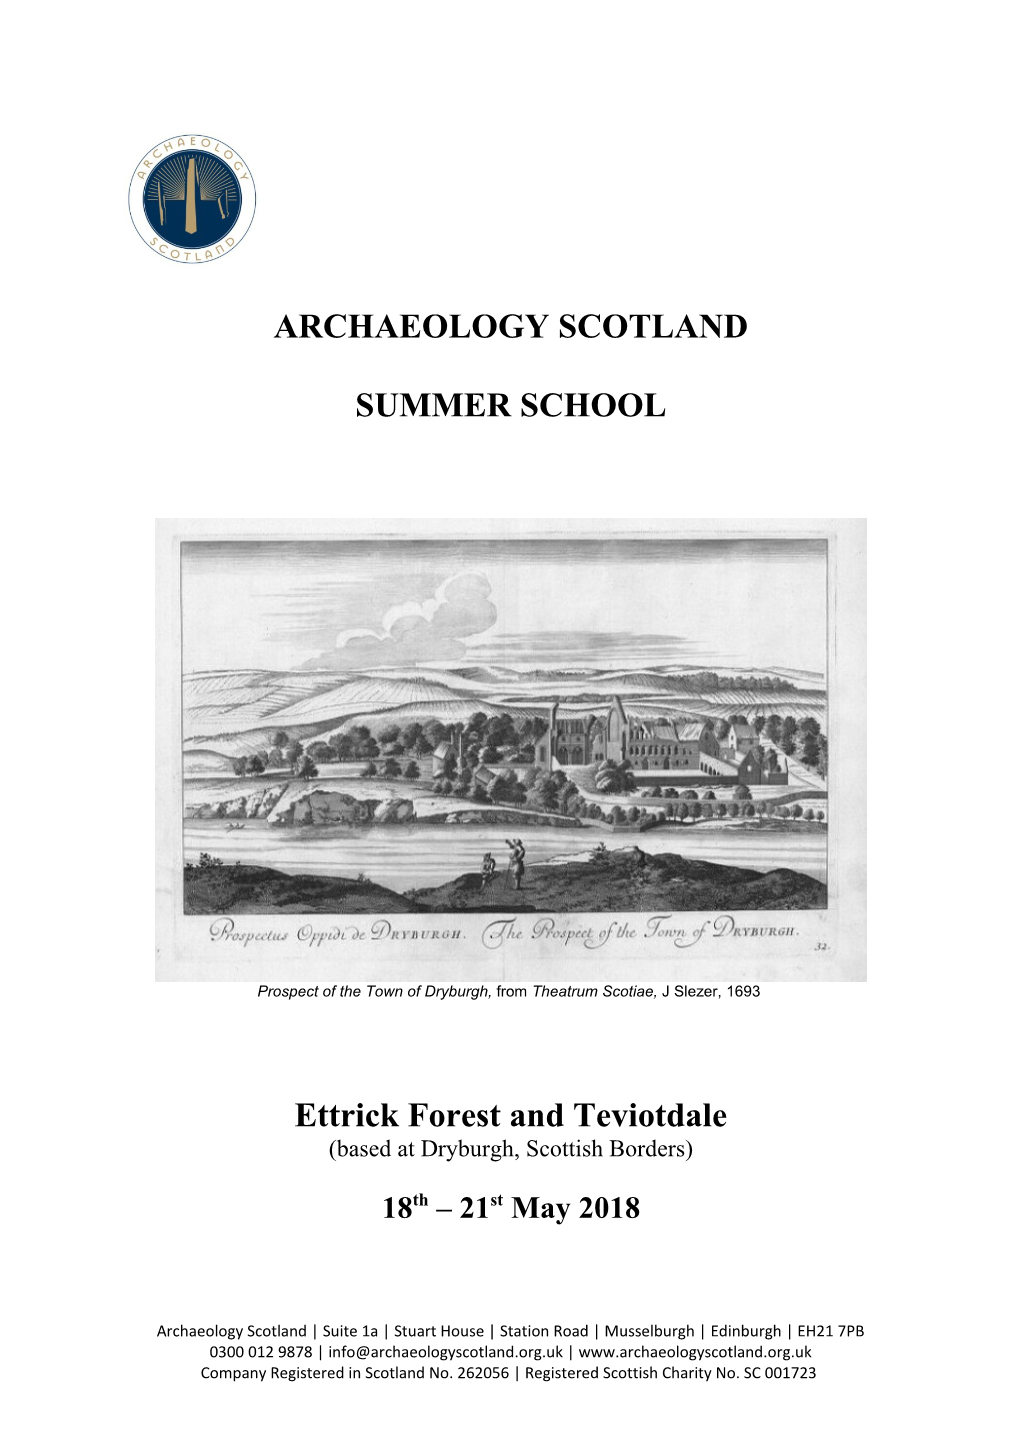 Council for Scottish Archaeology 50Th Anniversary Summer School, 9Th-13Th May 2002